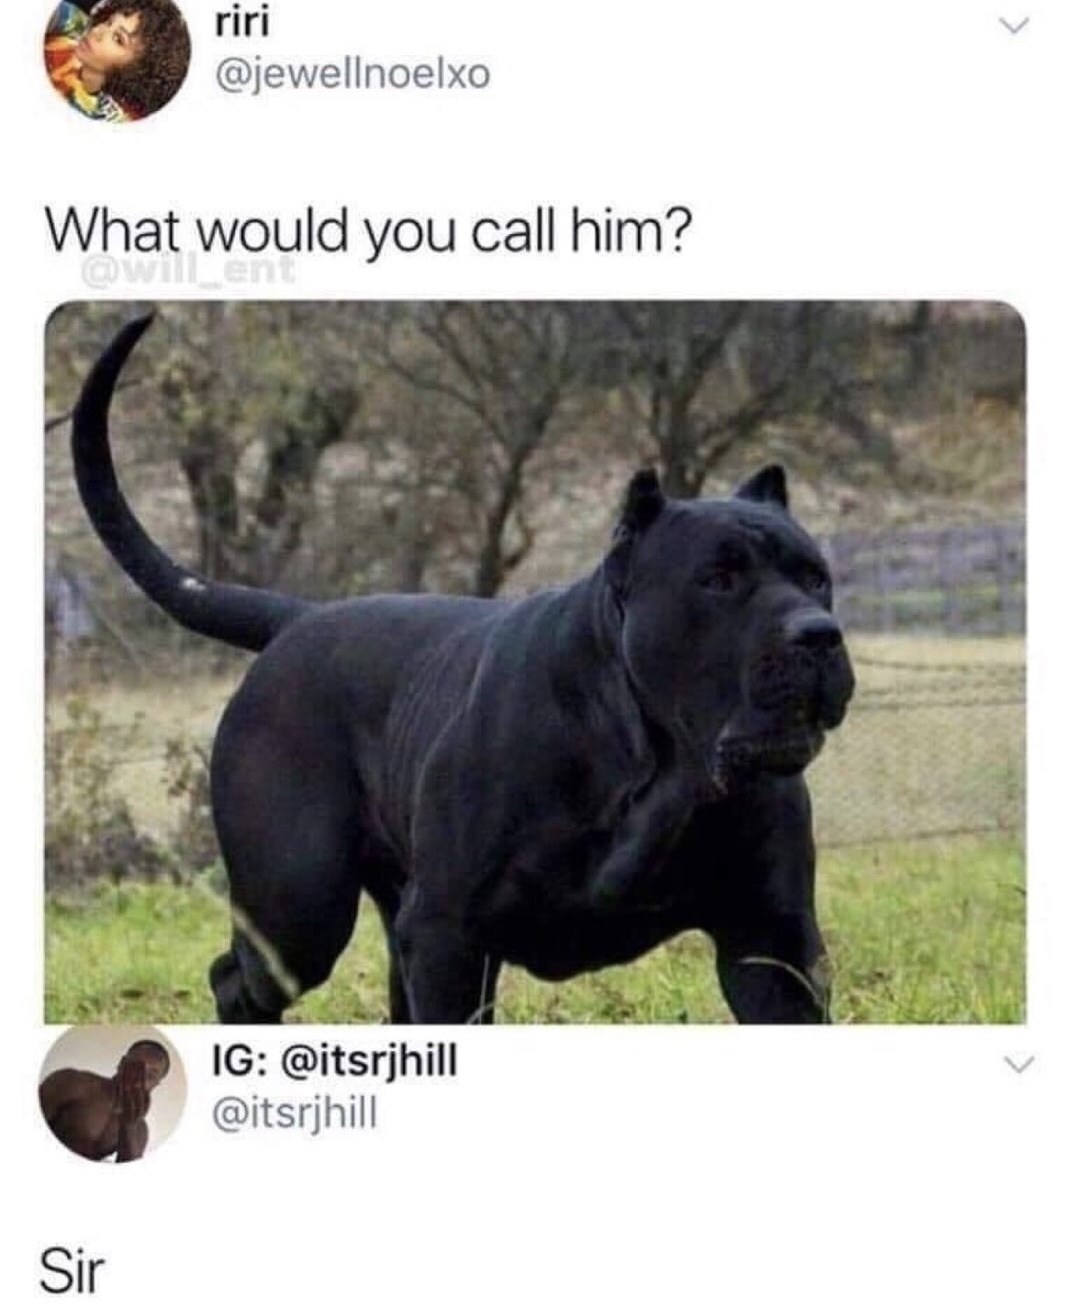 Do that you call sir because he looks so tough